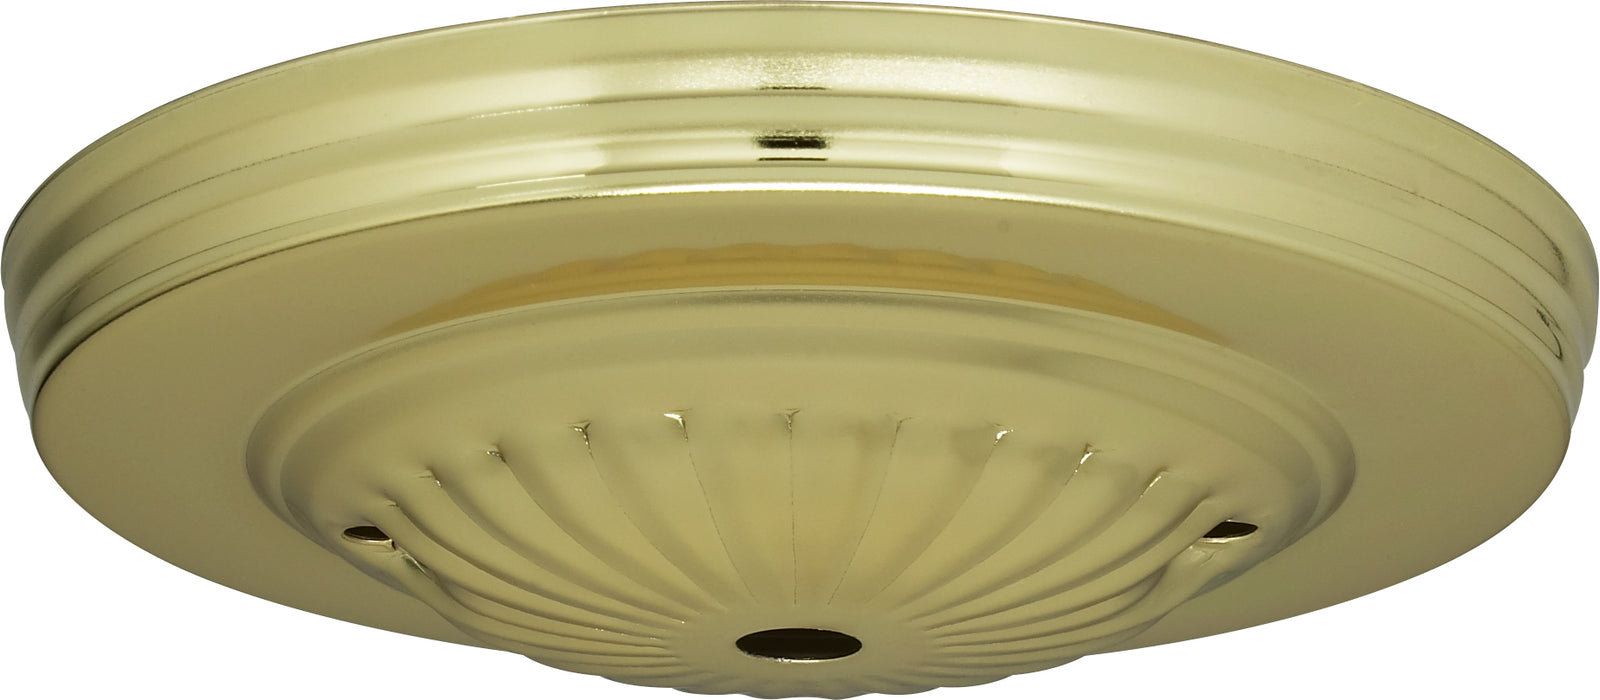 SATCO/NUVO Ribbed Canopy Only Brass Finish 5 Inch Diameter 7/16 Inch Center Hole 2-8/32 Bar Holes (90-1674)